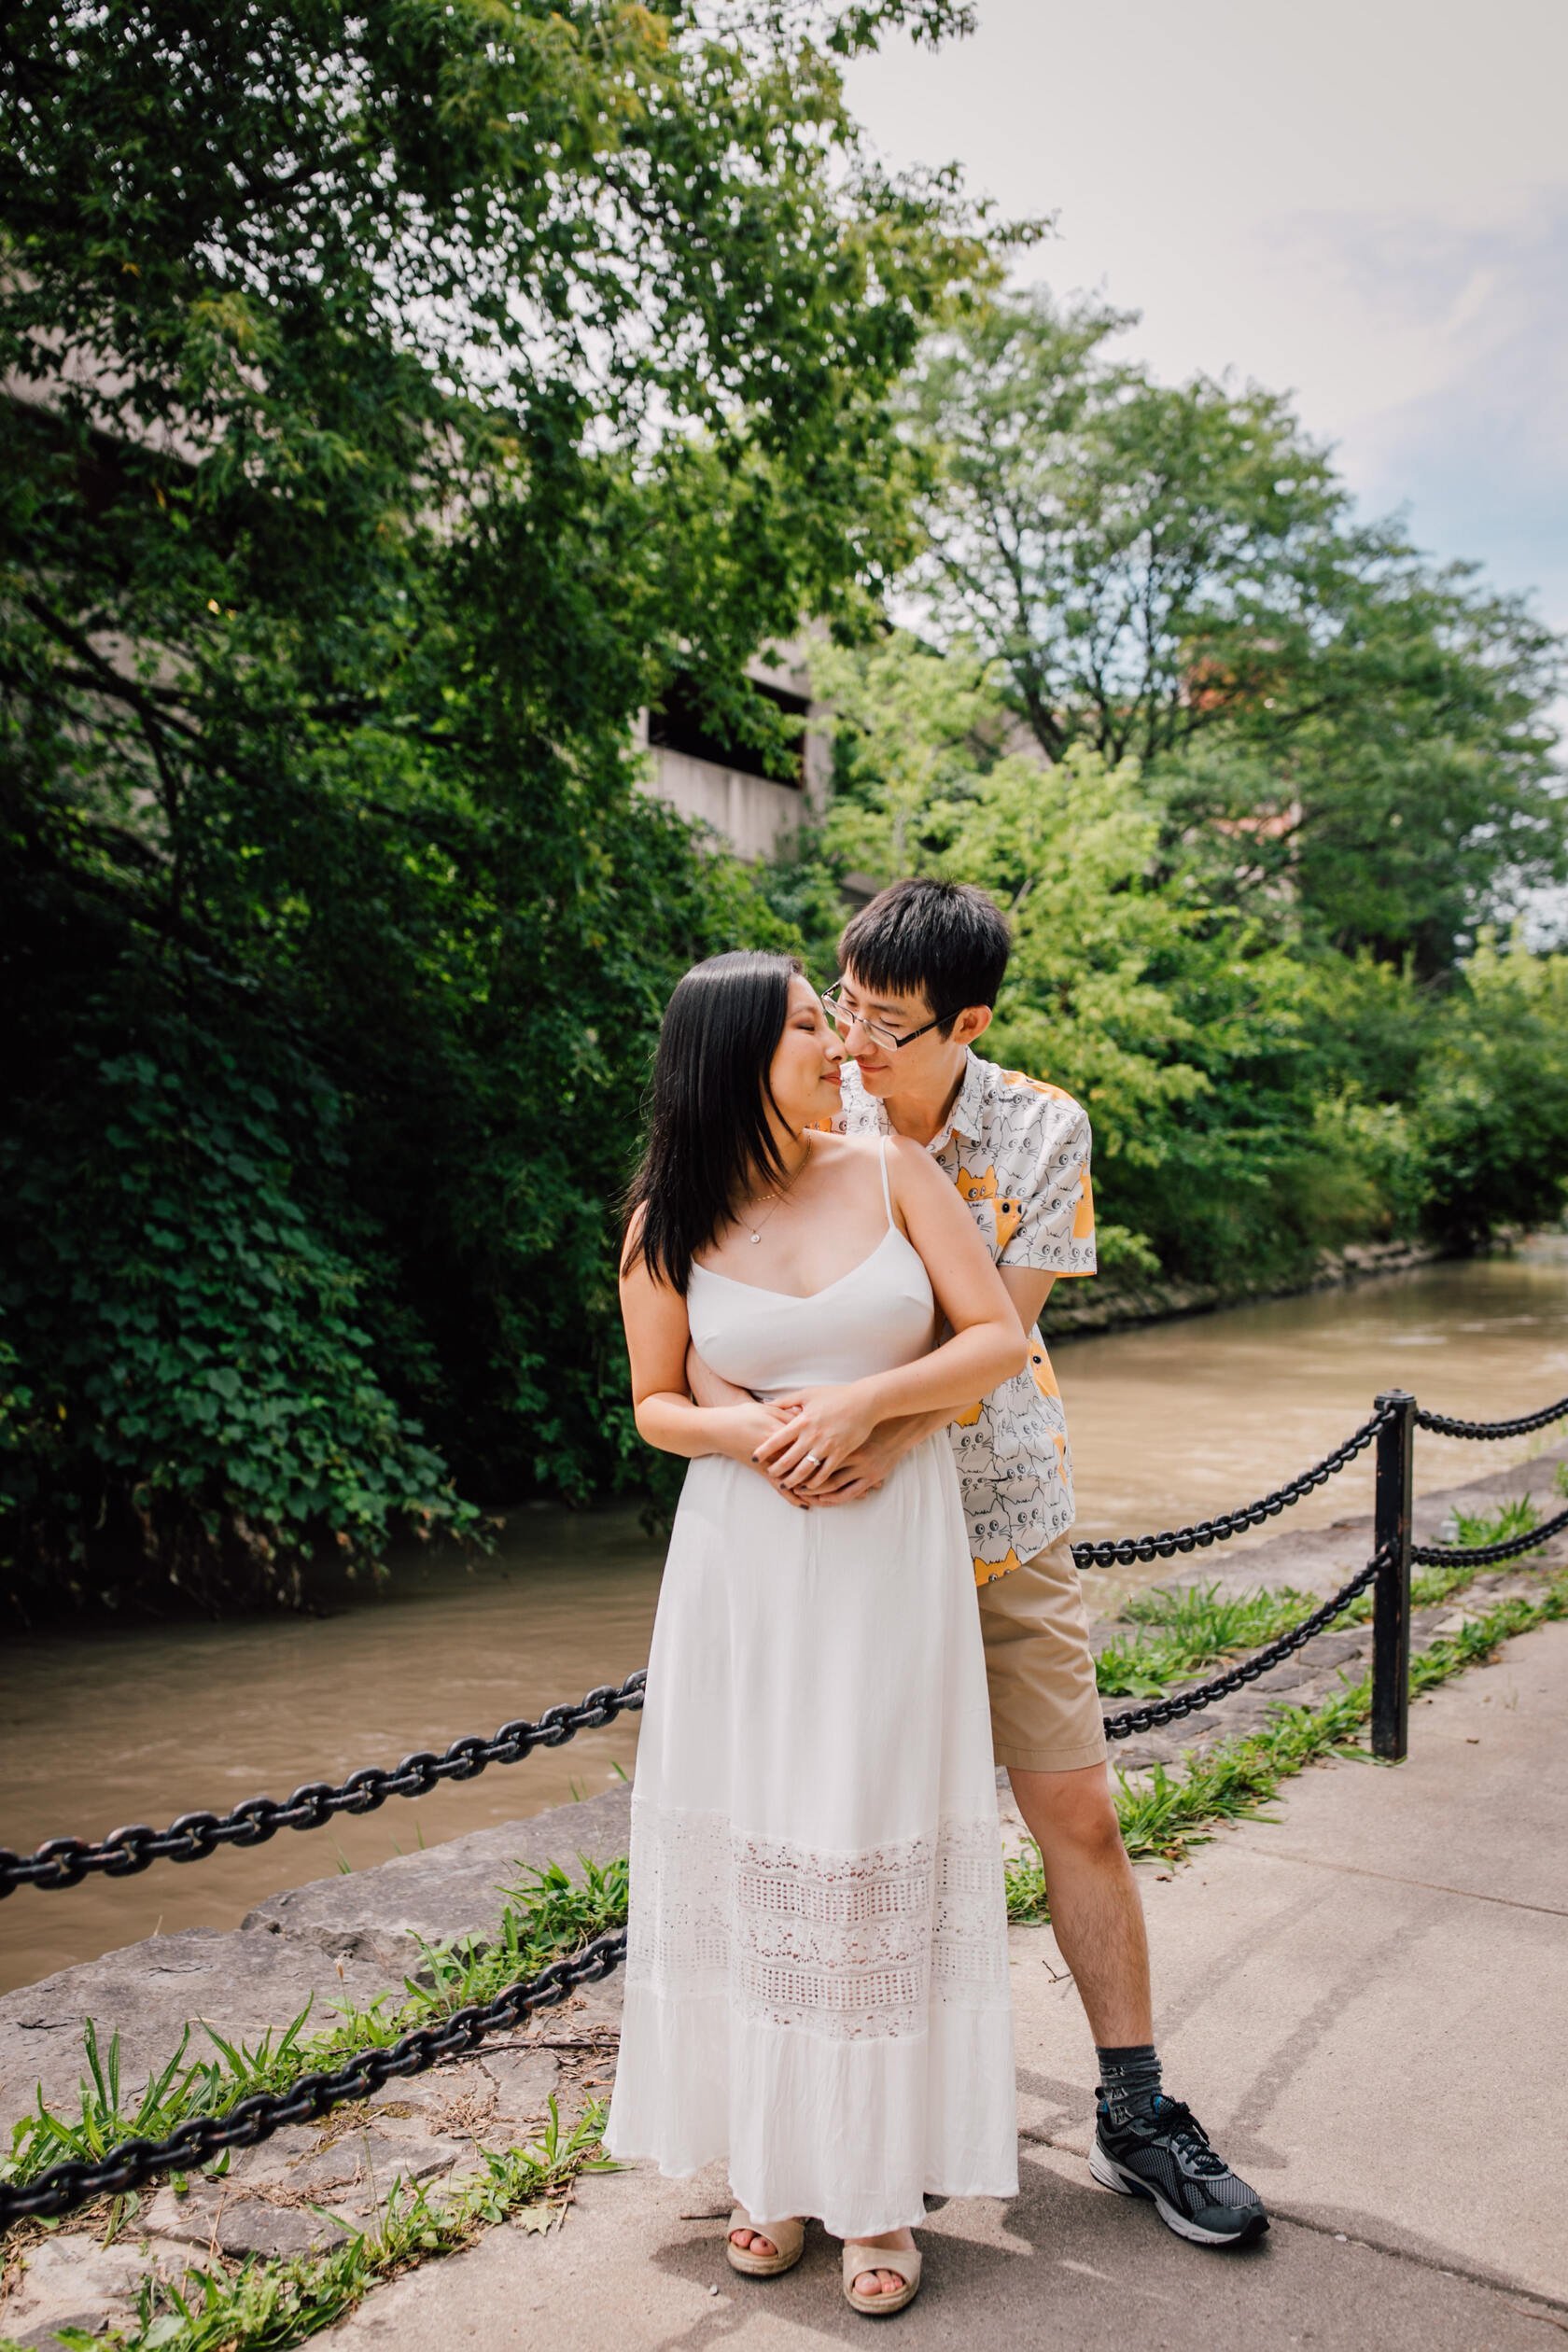  An engaged couple stand together in front of a creek, Syracuse creekwalk&nbsp; 